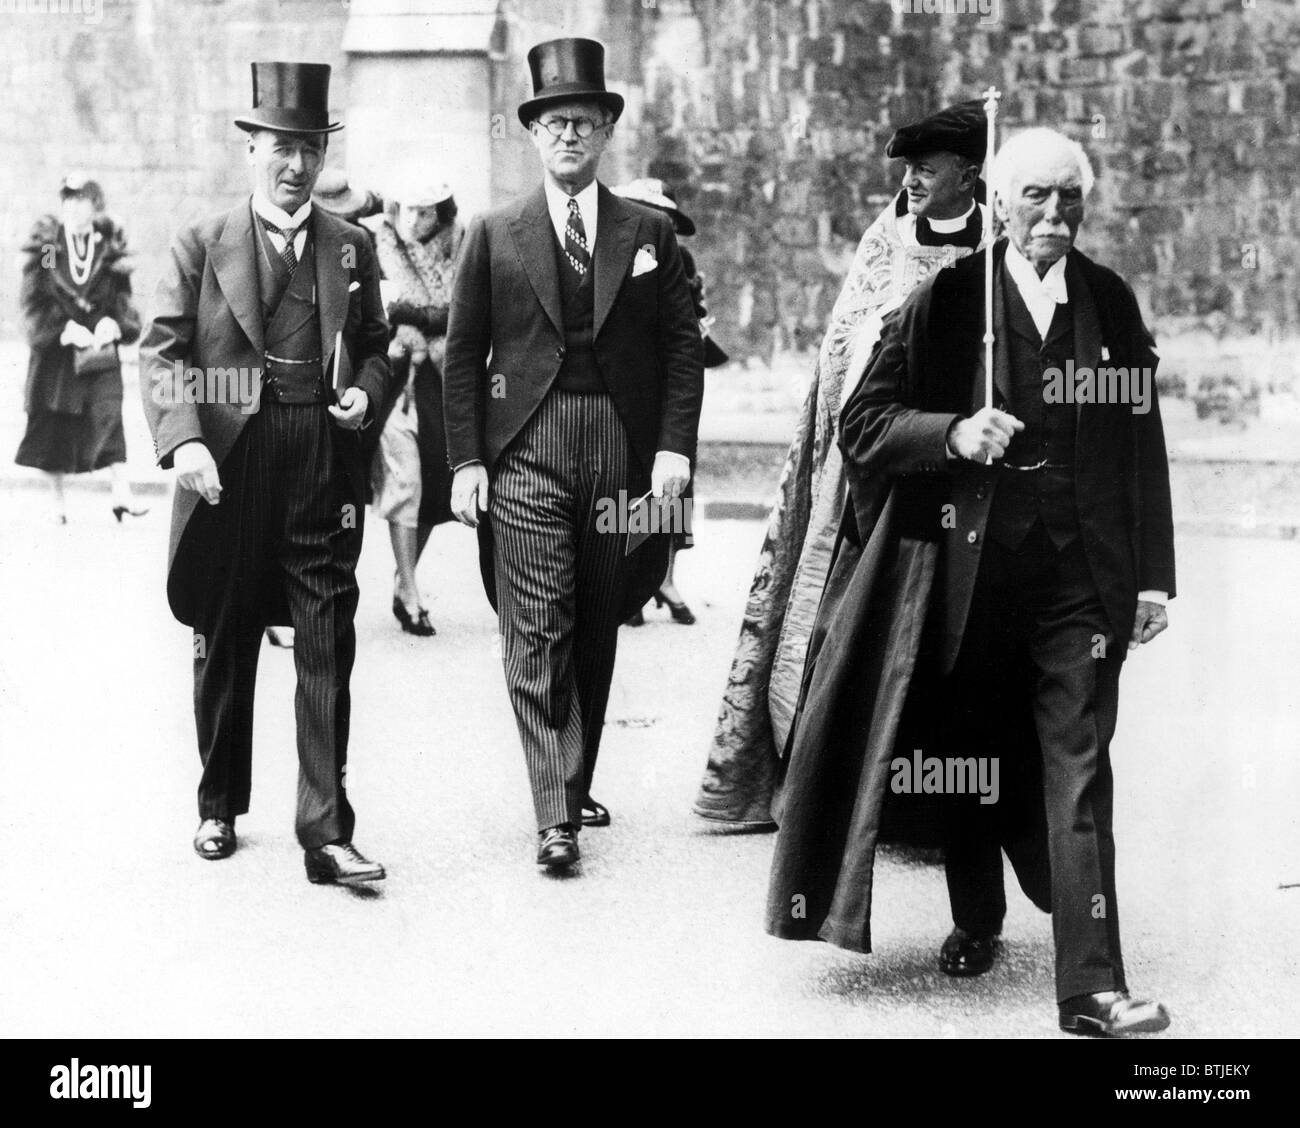 WINCHESTER, ENG: Joseph P. Kennedy (center), U.S. Ambassador to Britain, walking with Lord Mottistone (left), Lord Lieutenant of Stock Photo